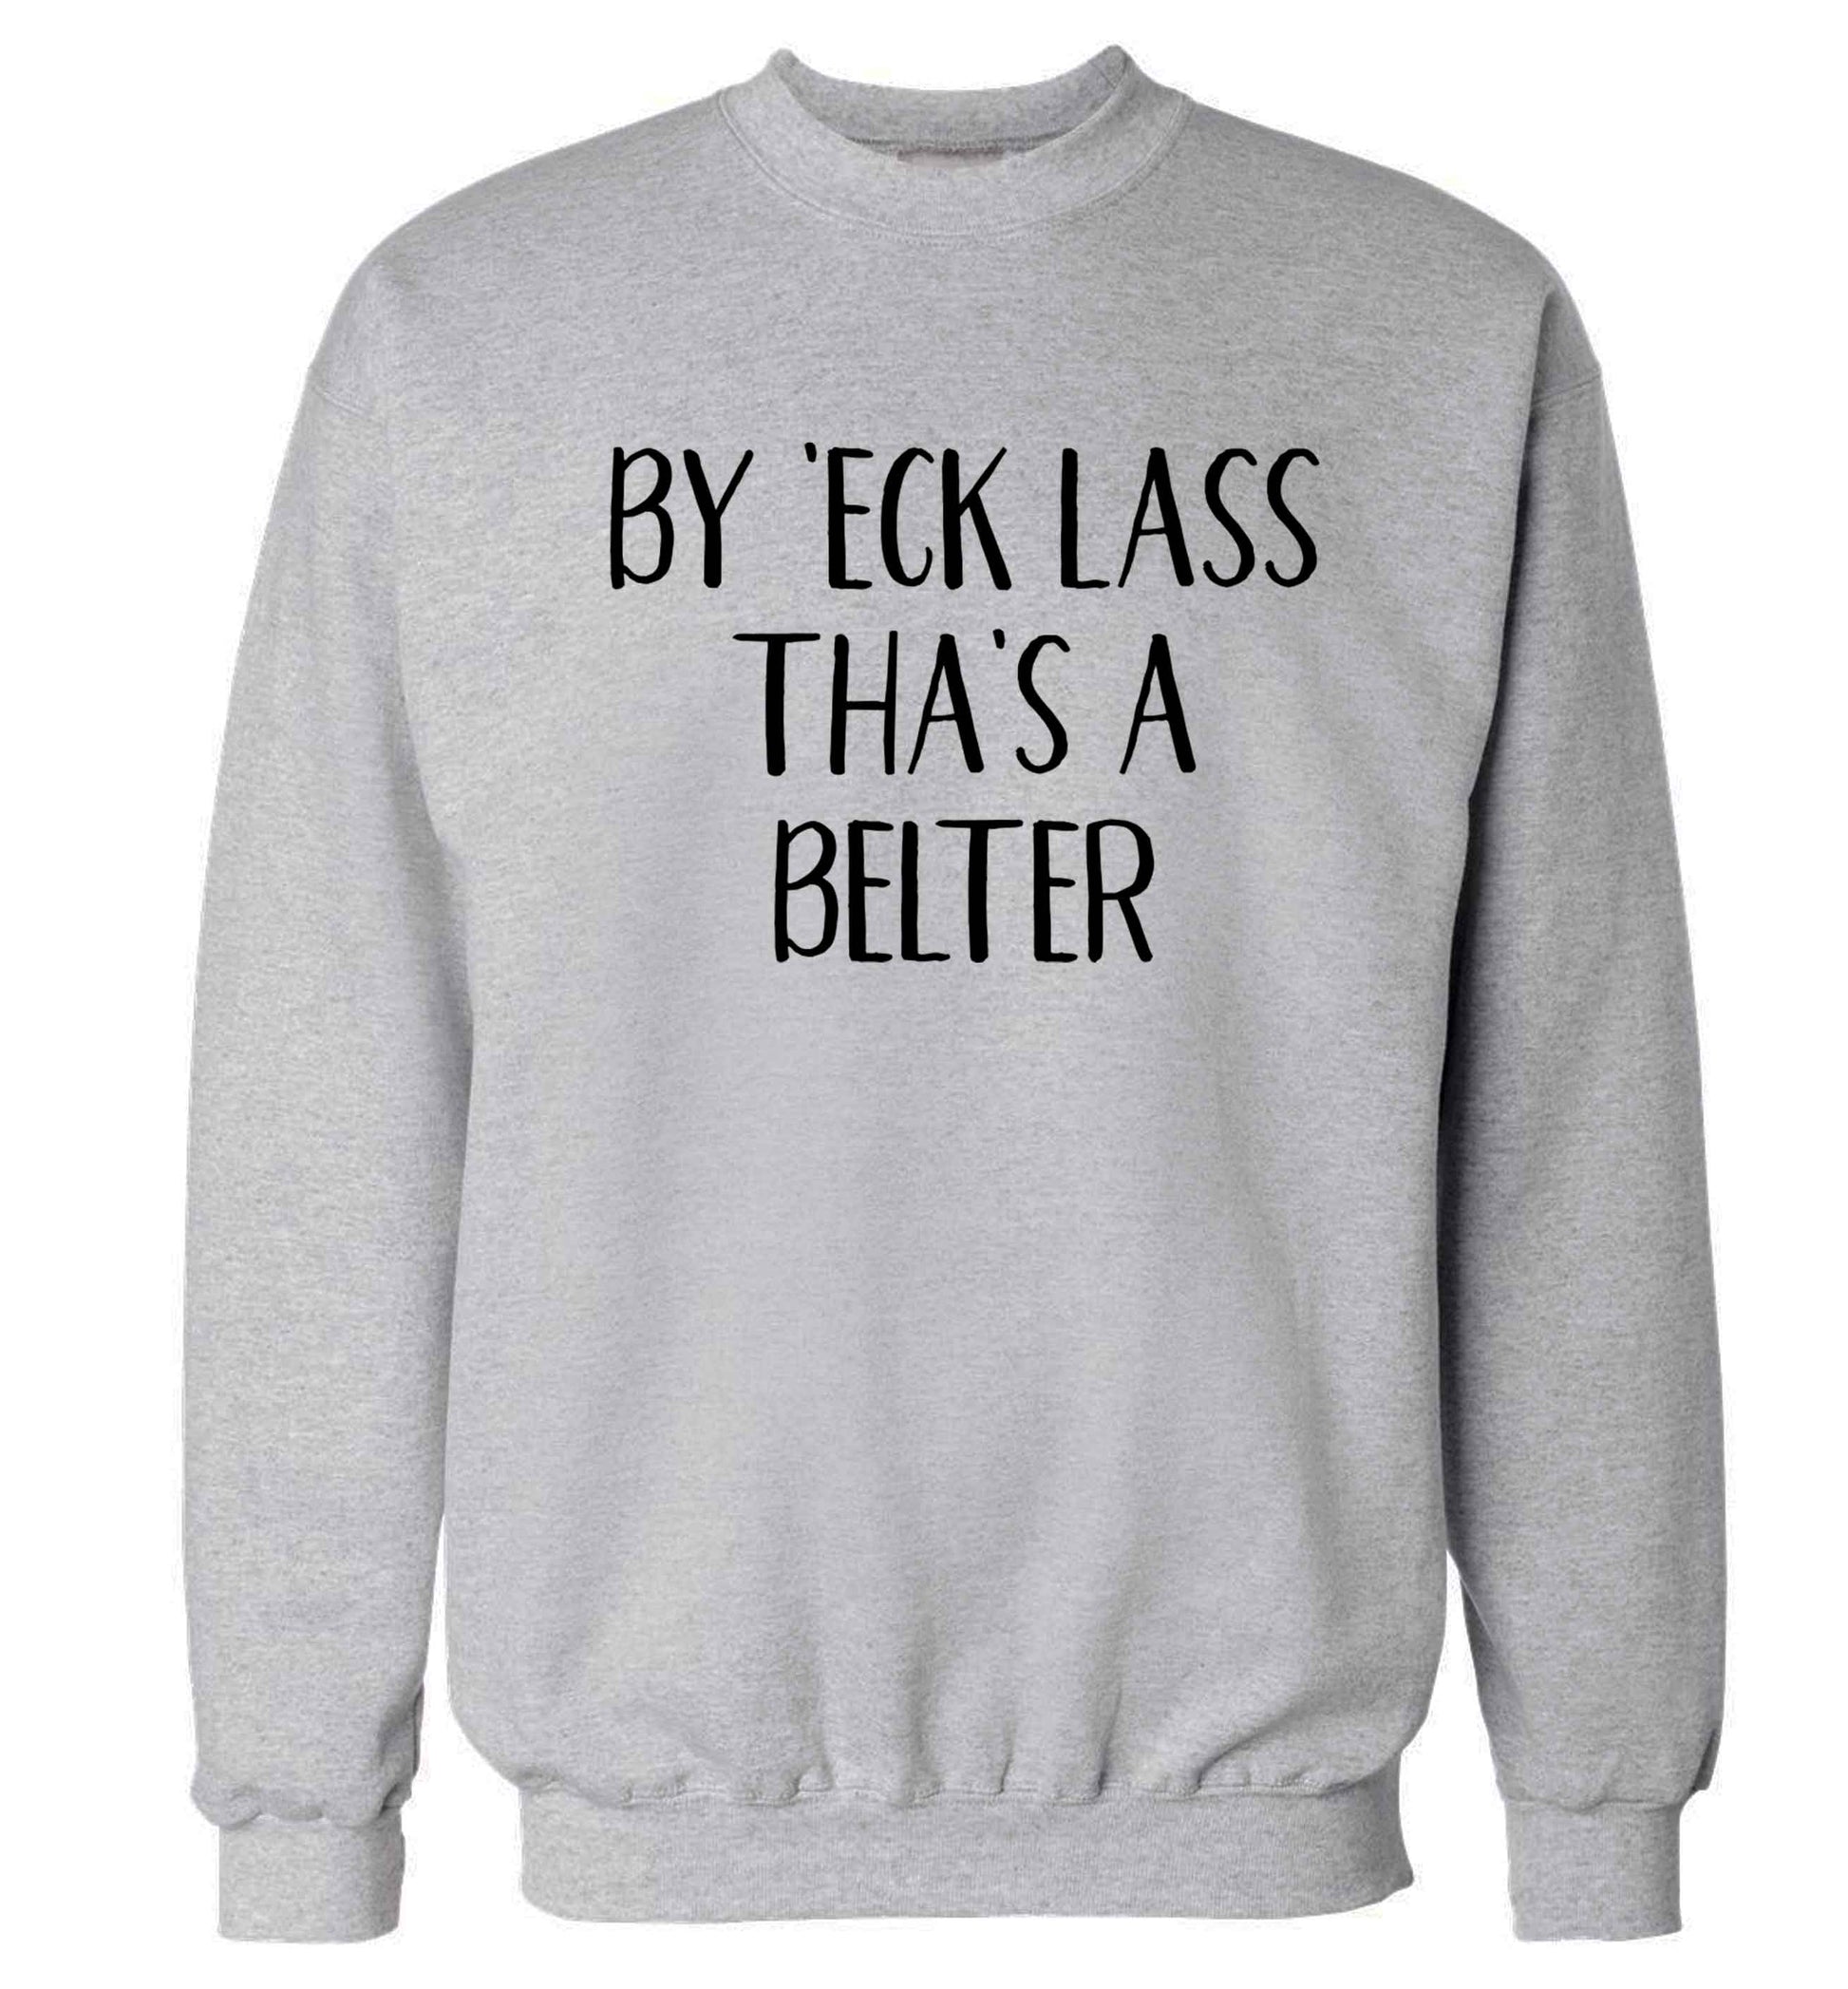 Be 'eck lass tha's a belter Adult's unisex grey Sweater 2XL